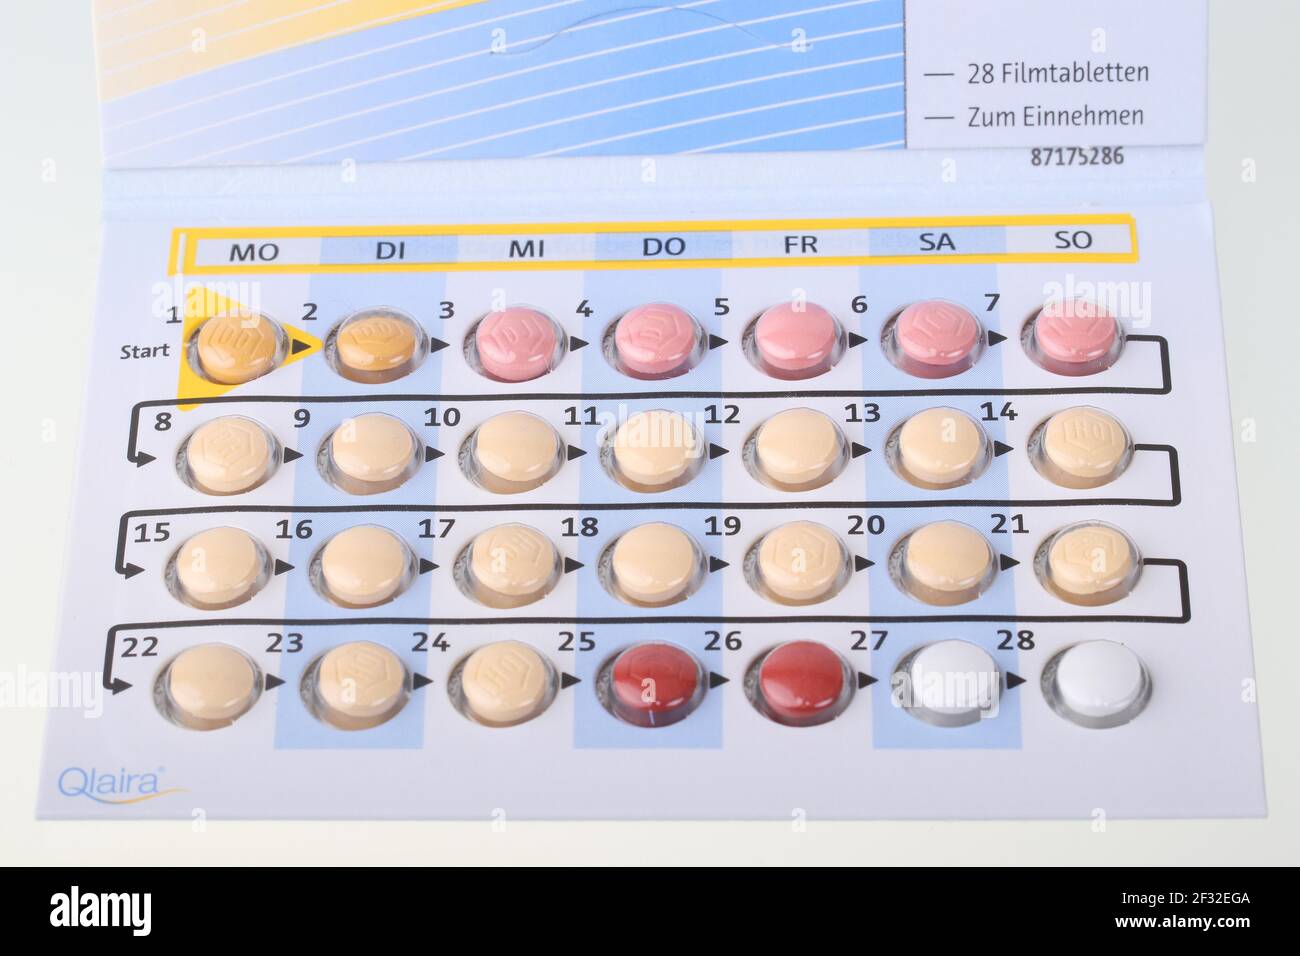 Contraceptive pill Qlaira of the company Jenapharm, drug for contraception, tablet packs, 4 phase preparation, monthly pack Stock Photo